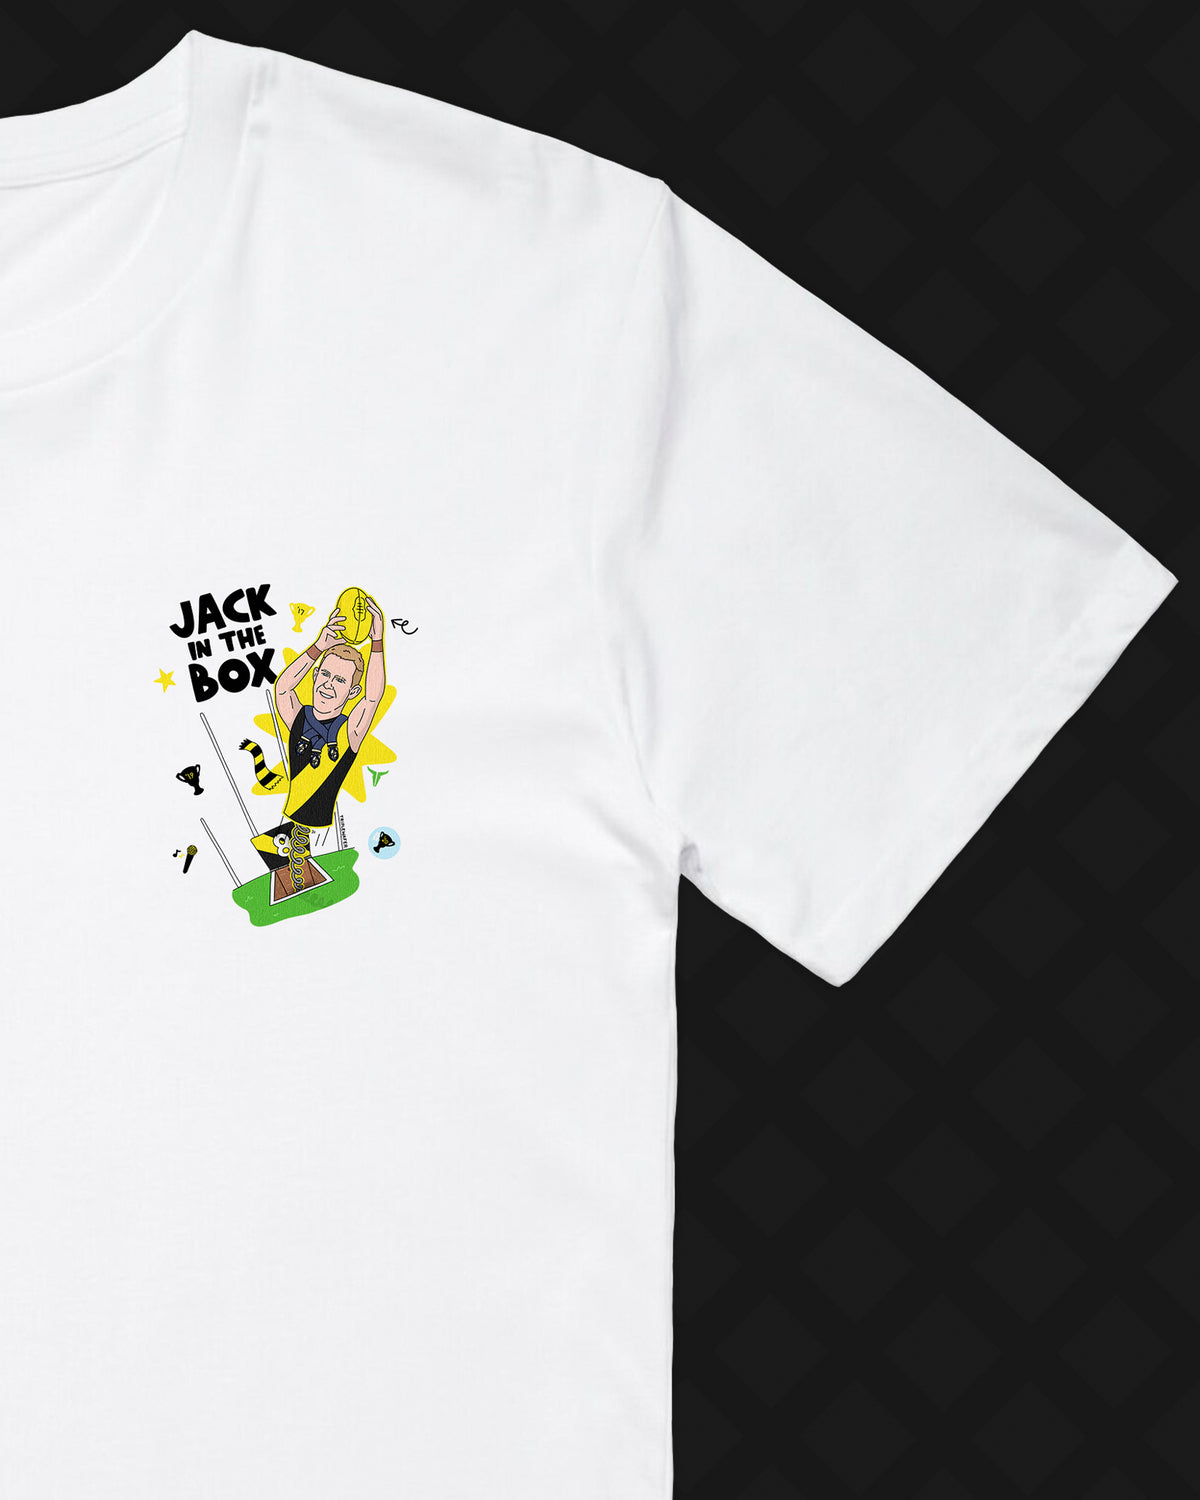 JACK IN THE BOX TEE